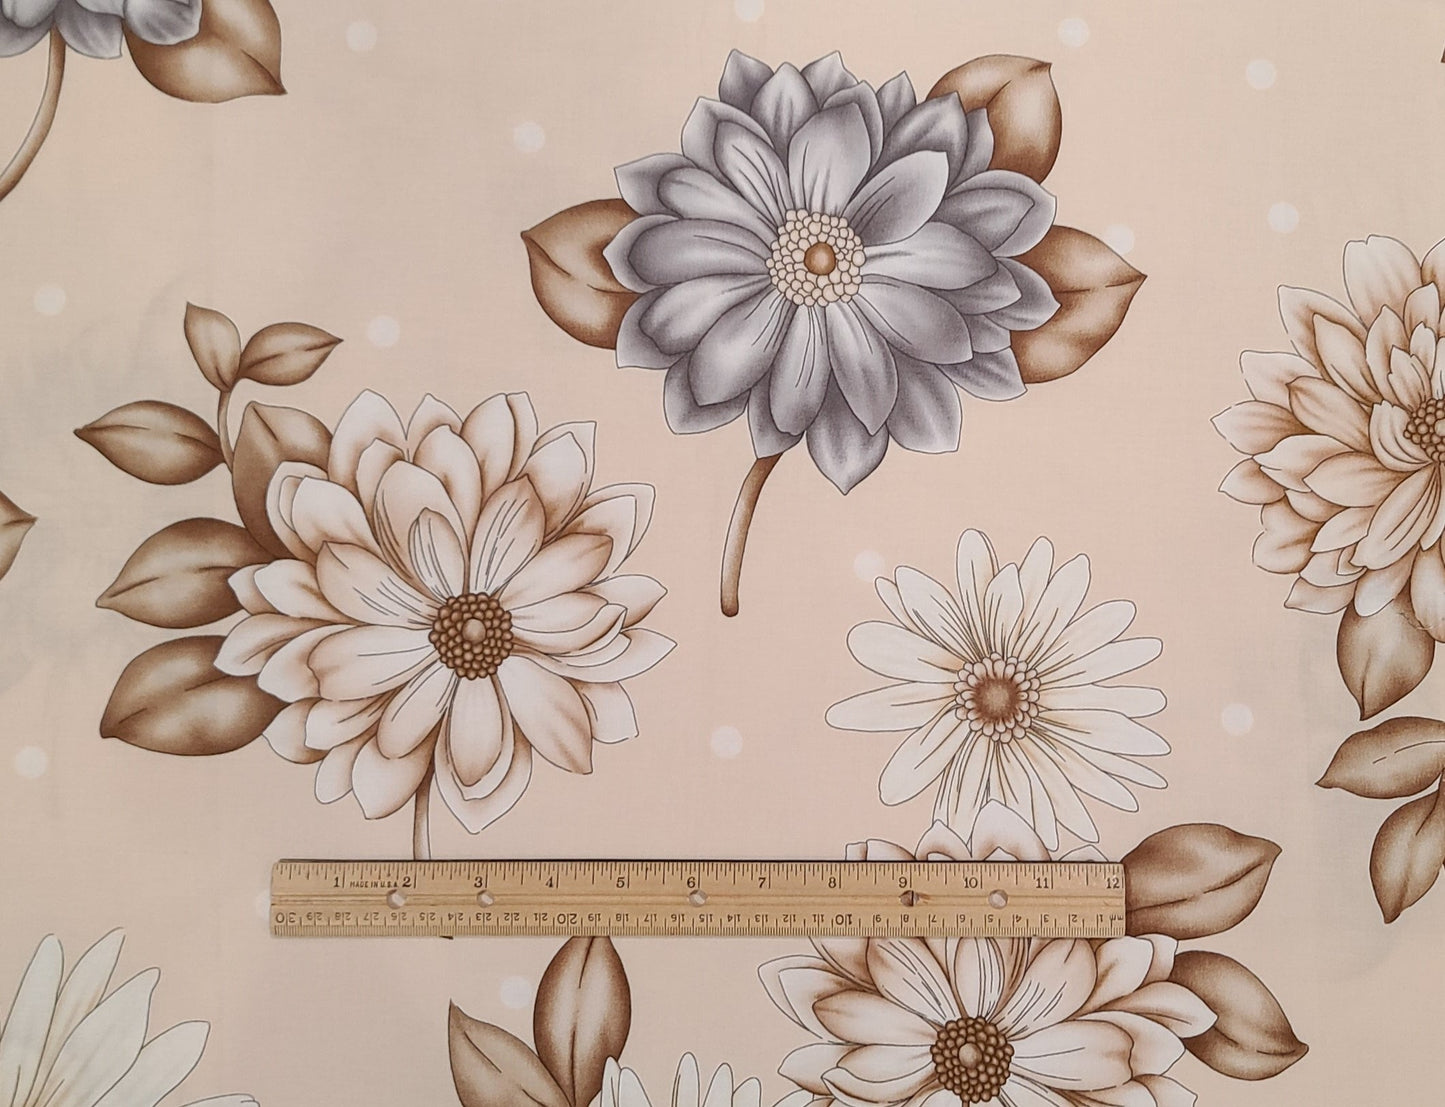 Mocha Meringue by Michele D'Amore for Marcus Fabrics - Beige Fabric / Large Scale Gray and Light Brown Floral Print.